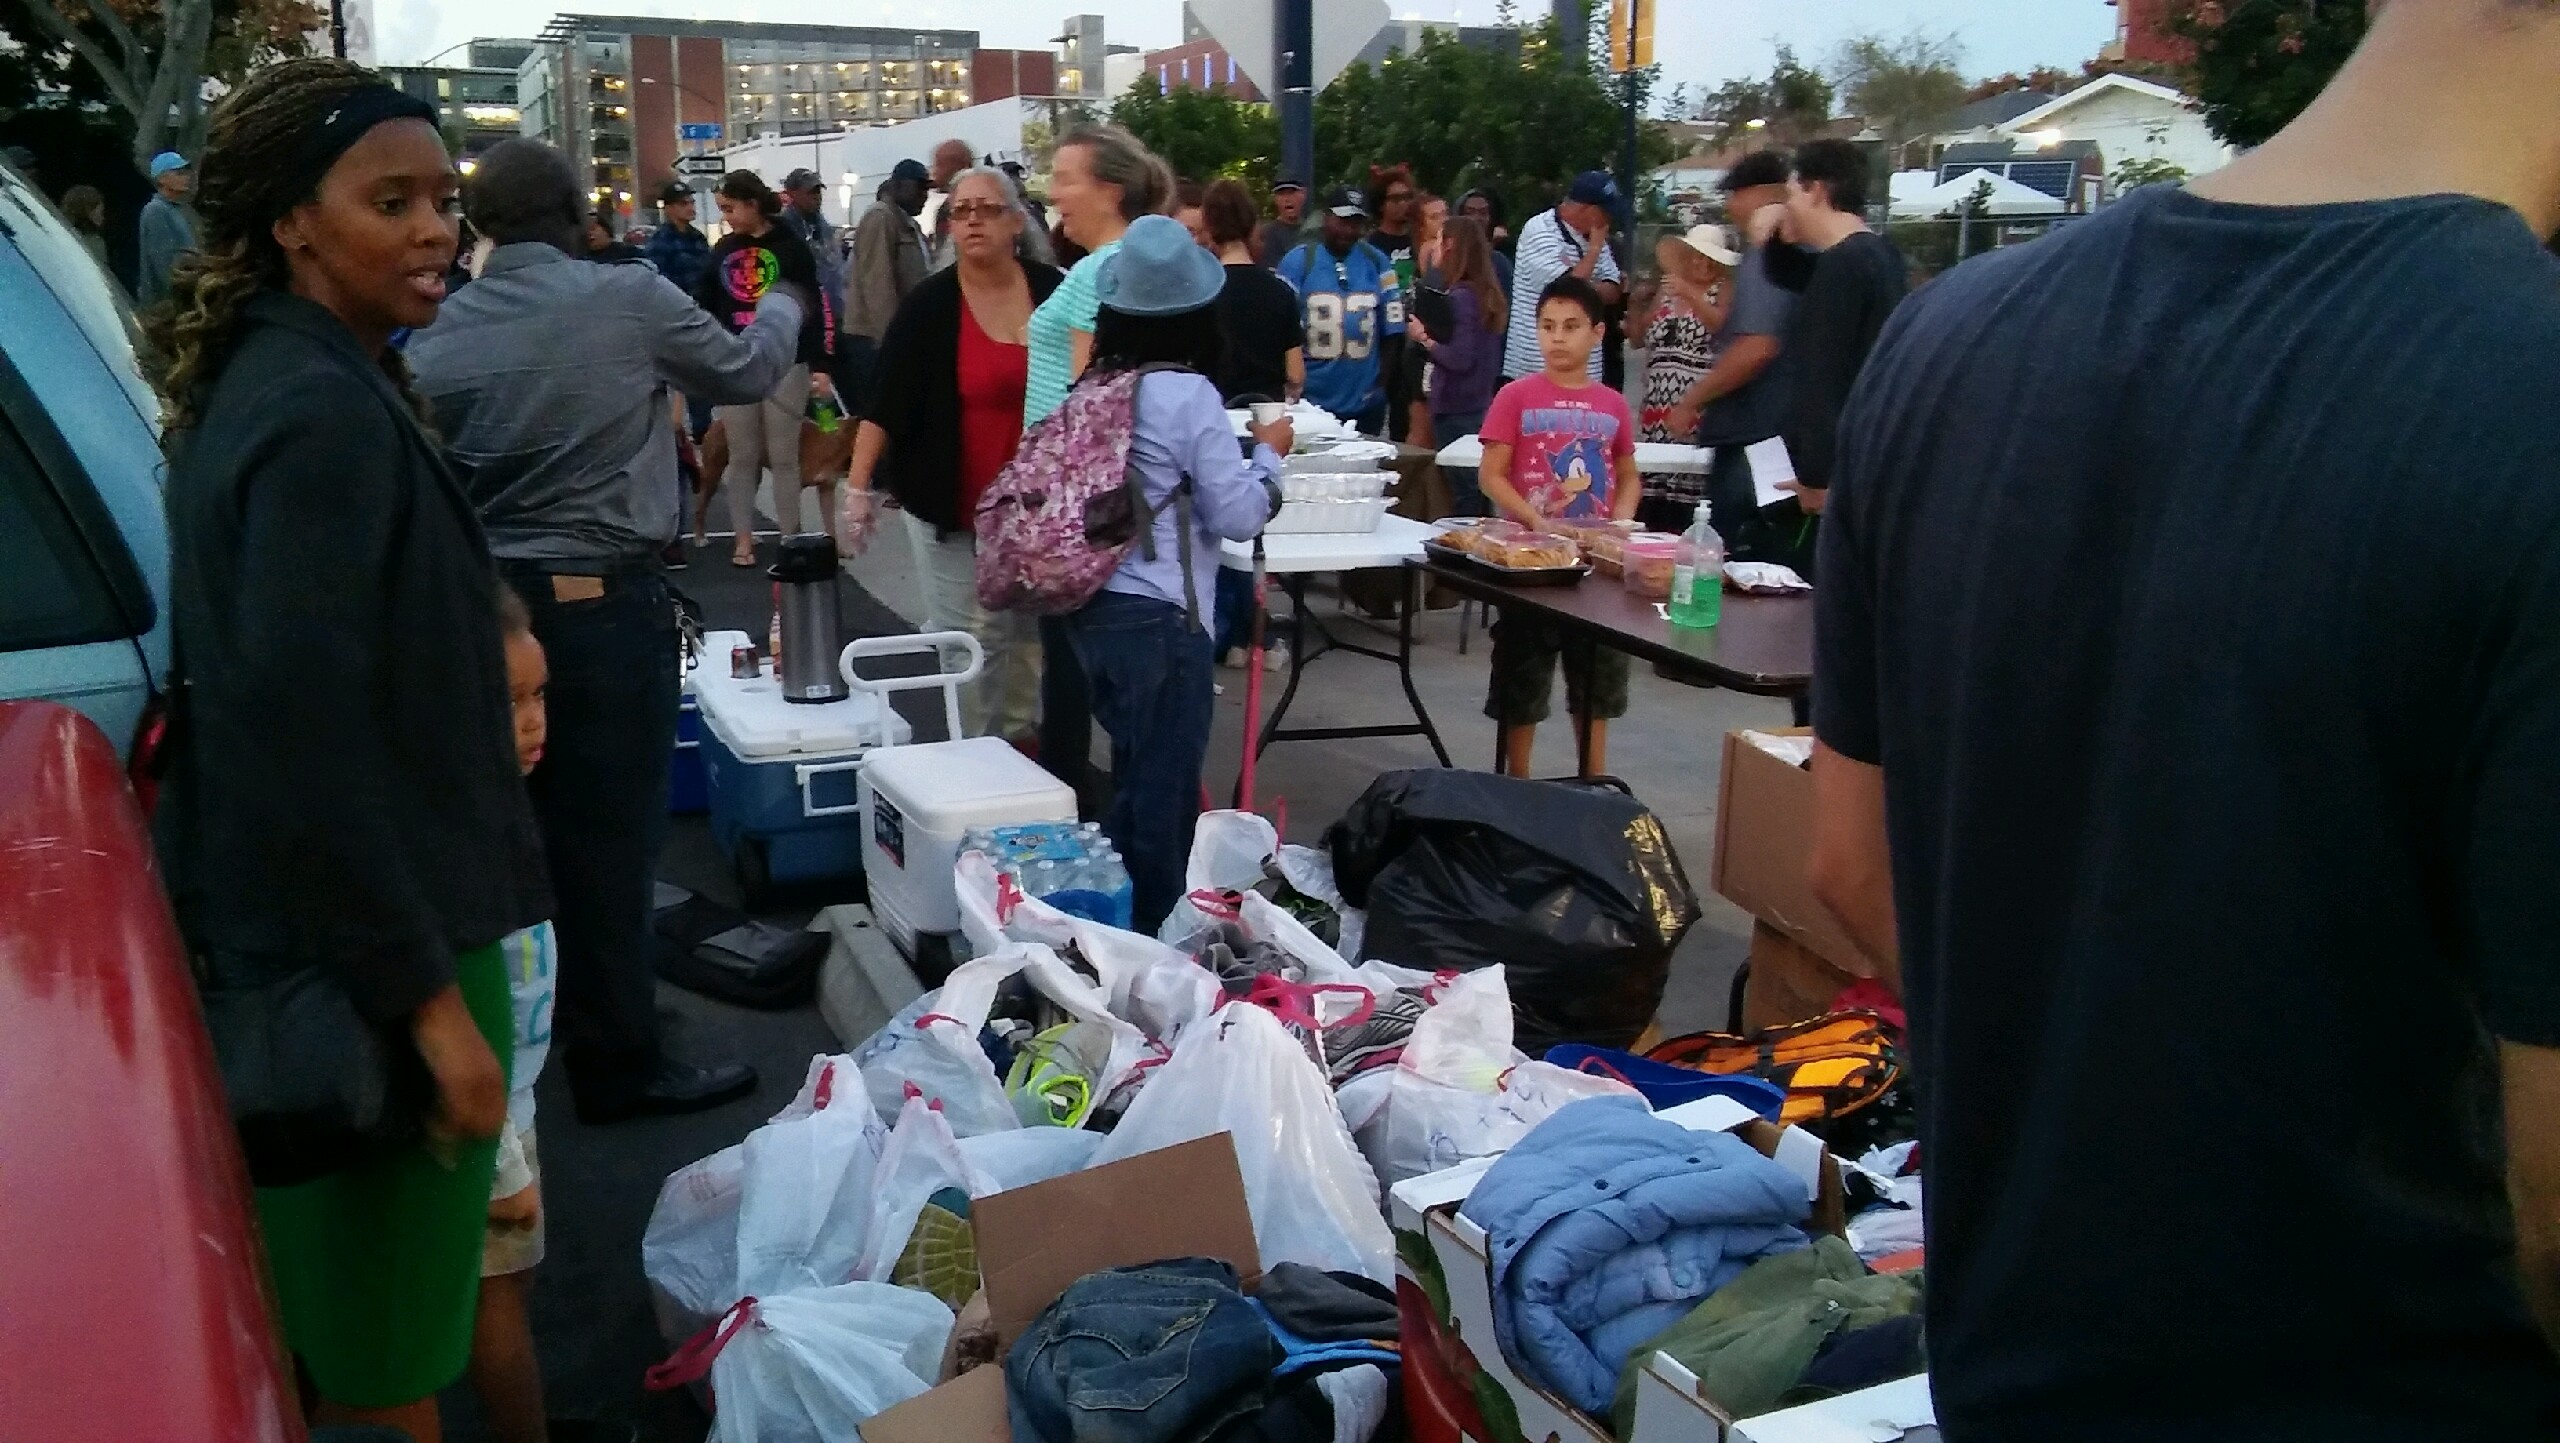 Food & Clothing for the Homeless of San Diego Streets of